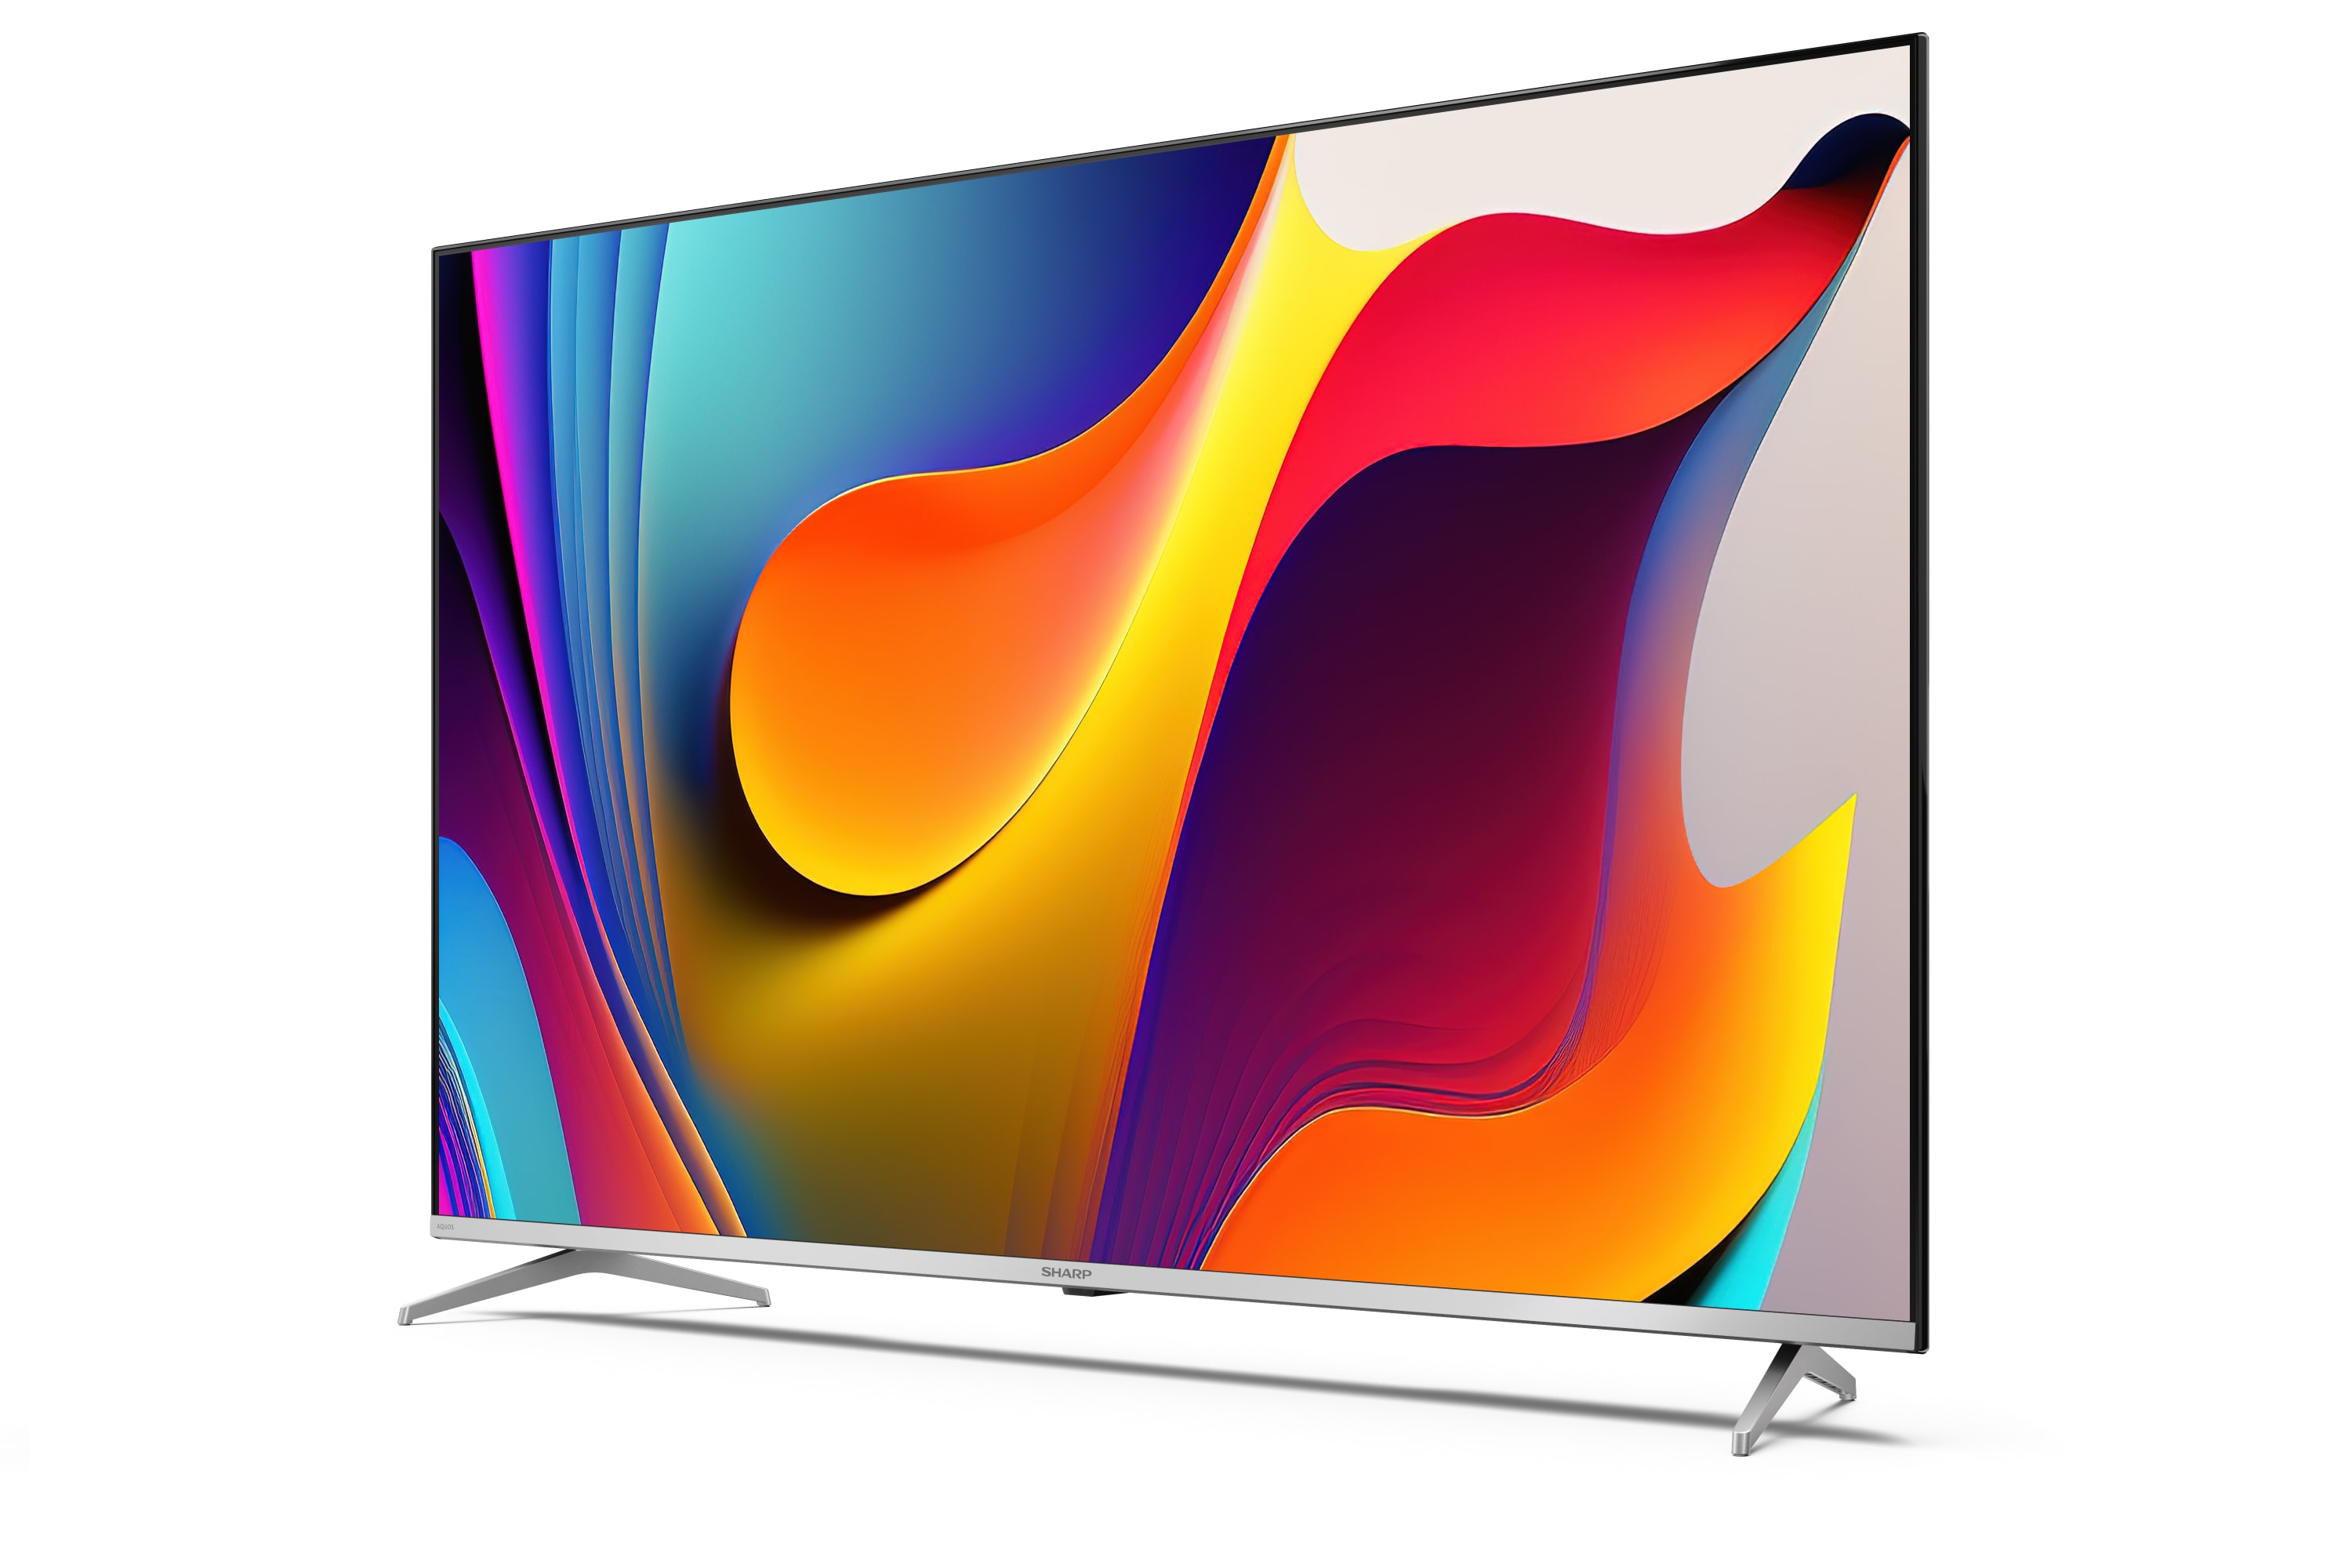 Android TV 4K UHD - ANDROID TV™ SHARP 55" 4K ULTRA HD QUANTUM DOT